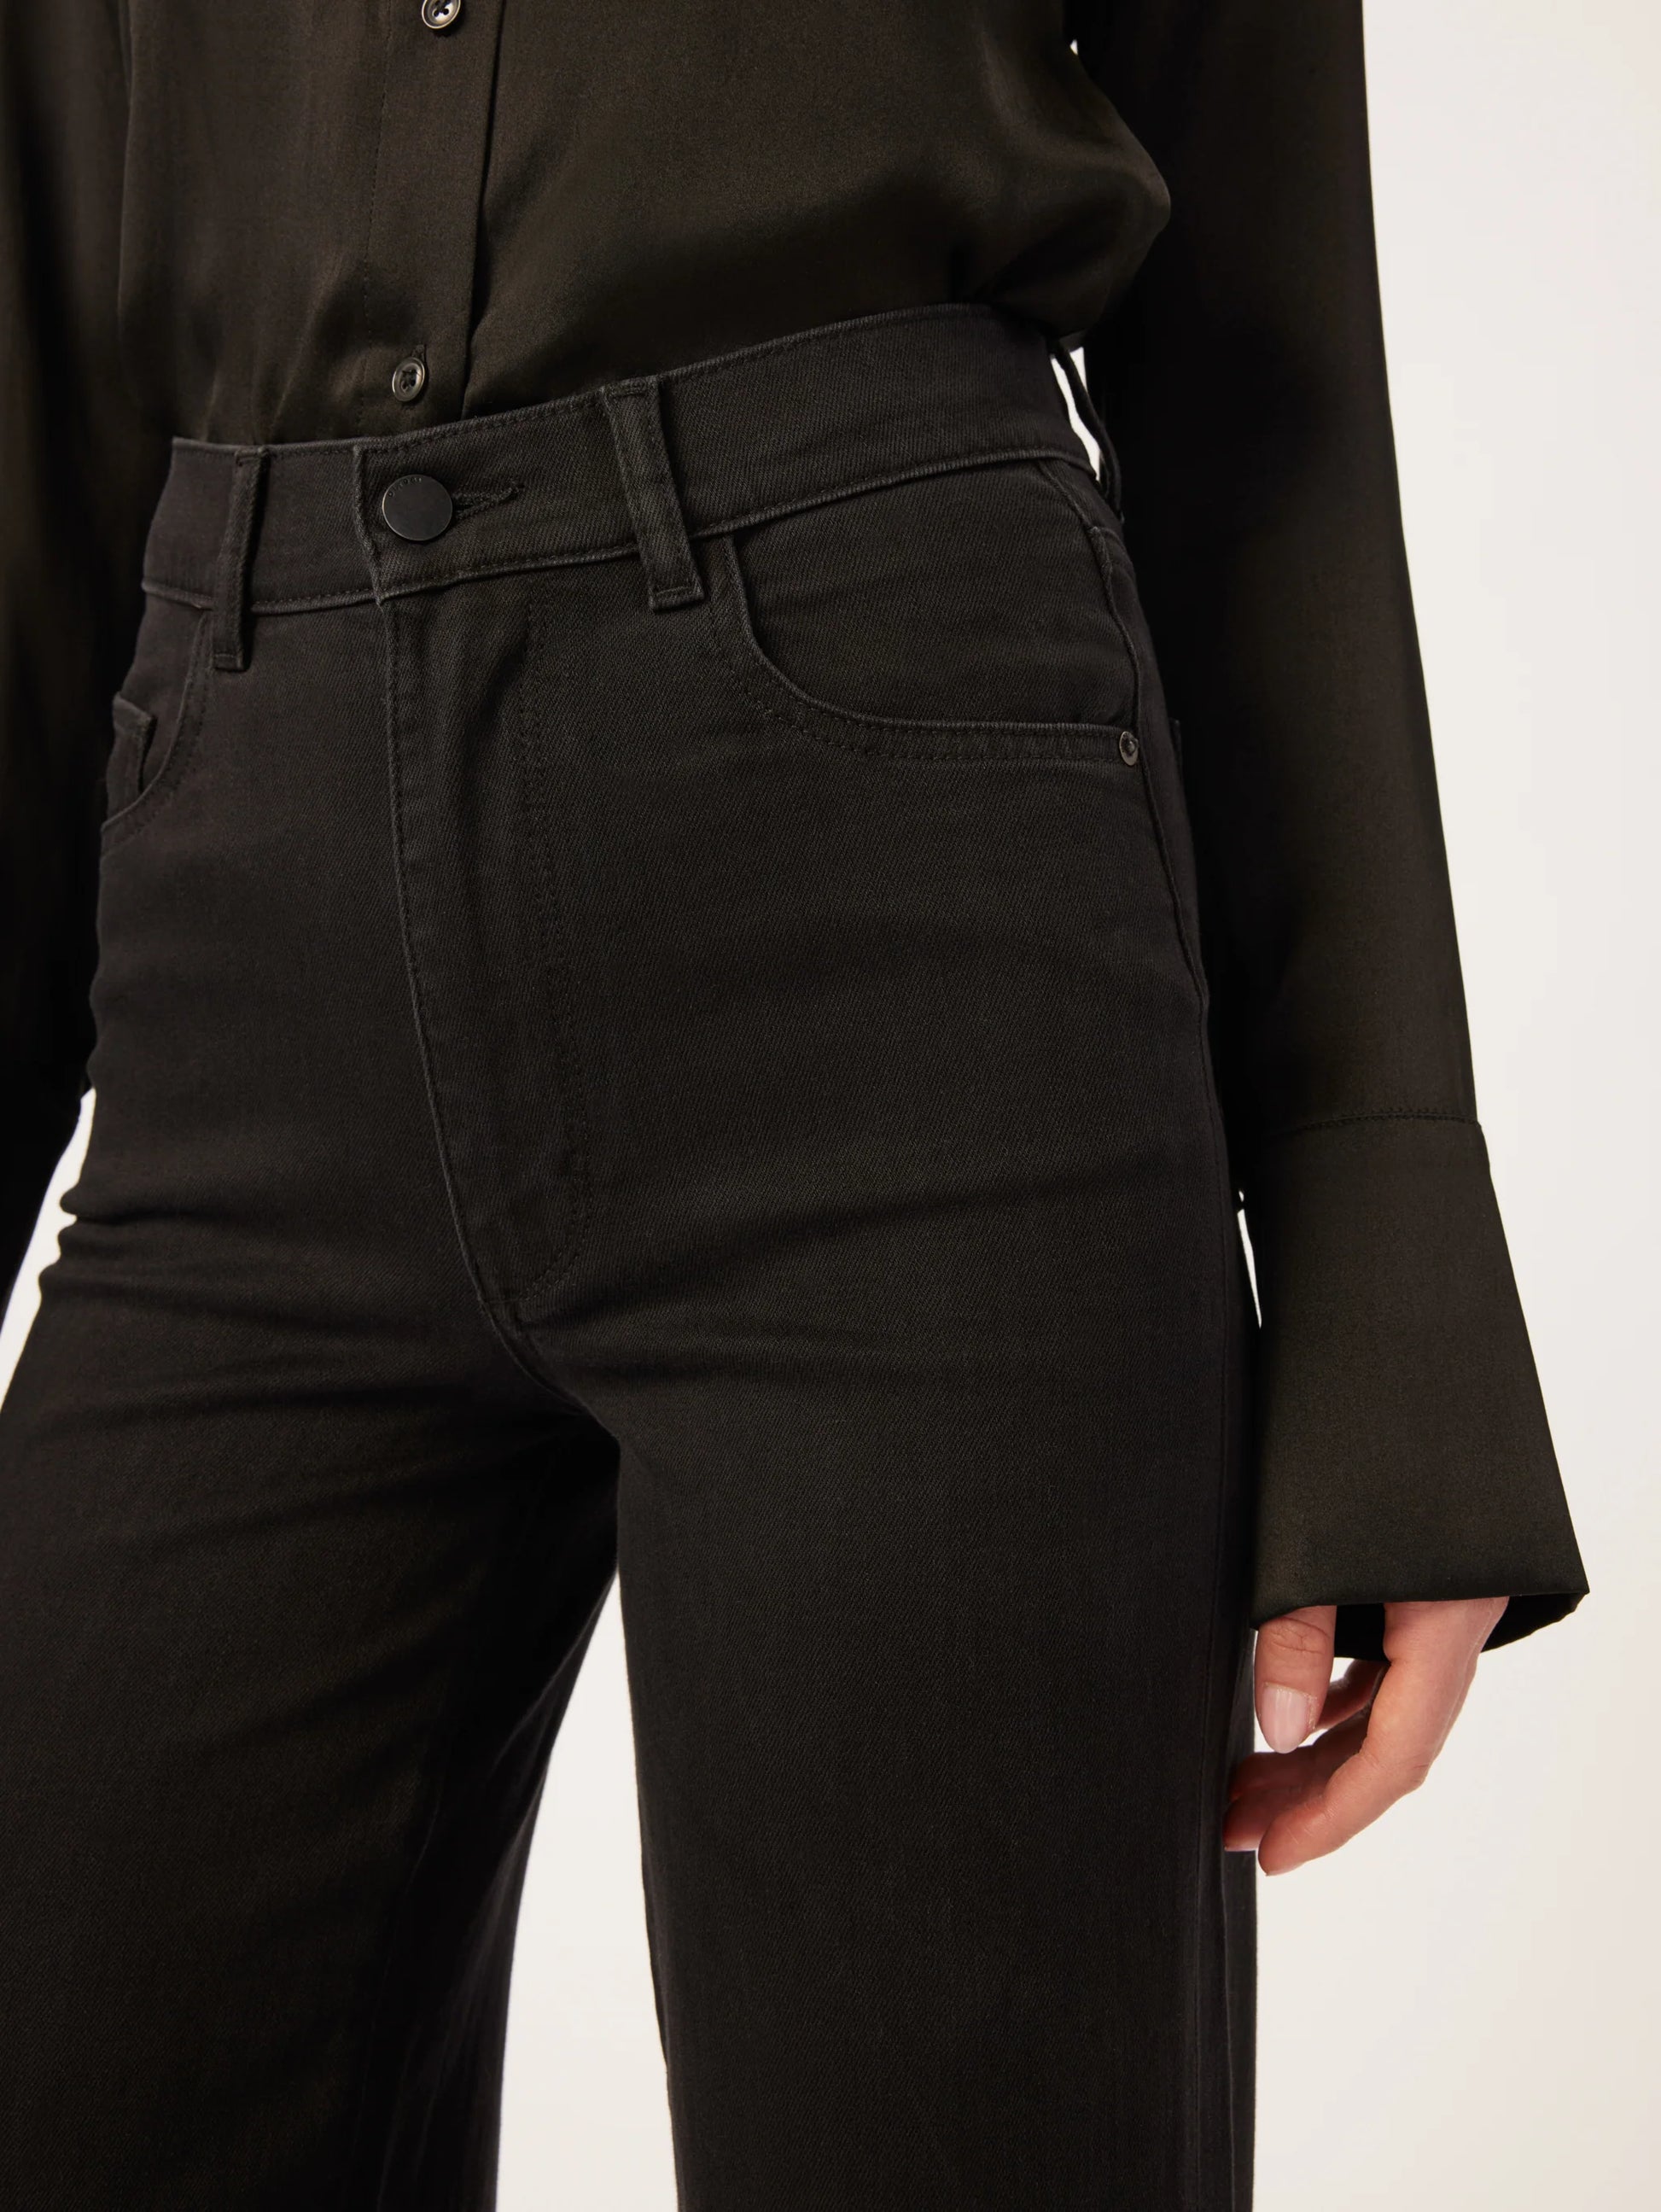 A woman wearing DL1961 Hepburn Wide Leg - Jet Black jeans with a vintage high-rise and a black blouse.